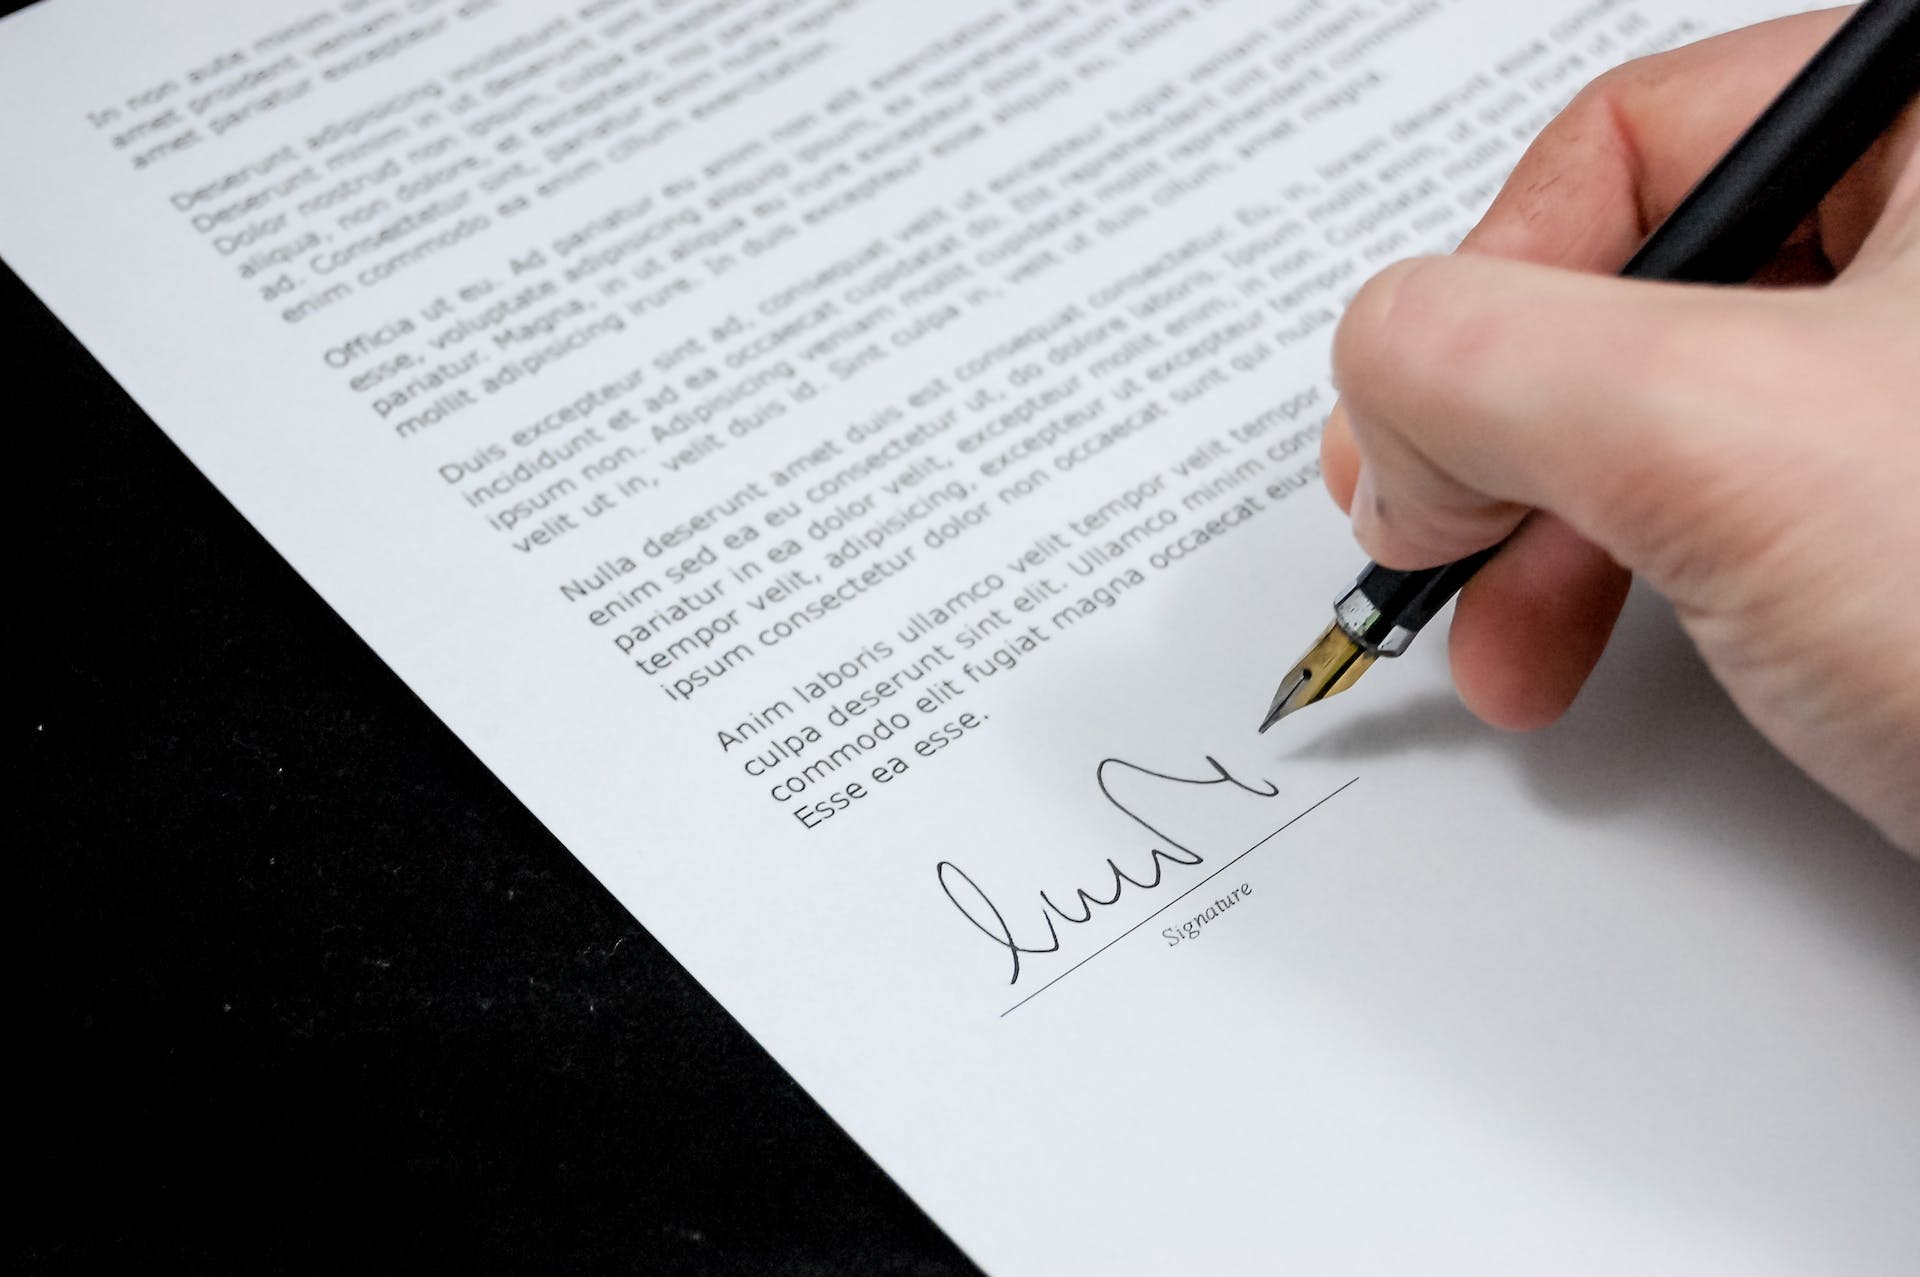 Person signing a document | Source: Pexels